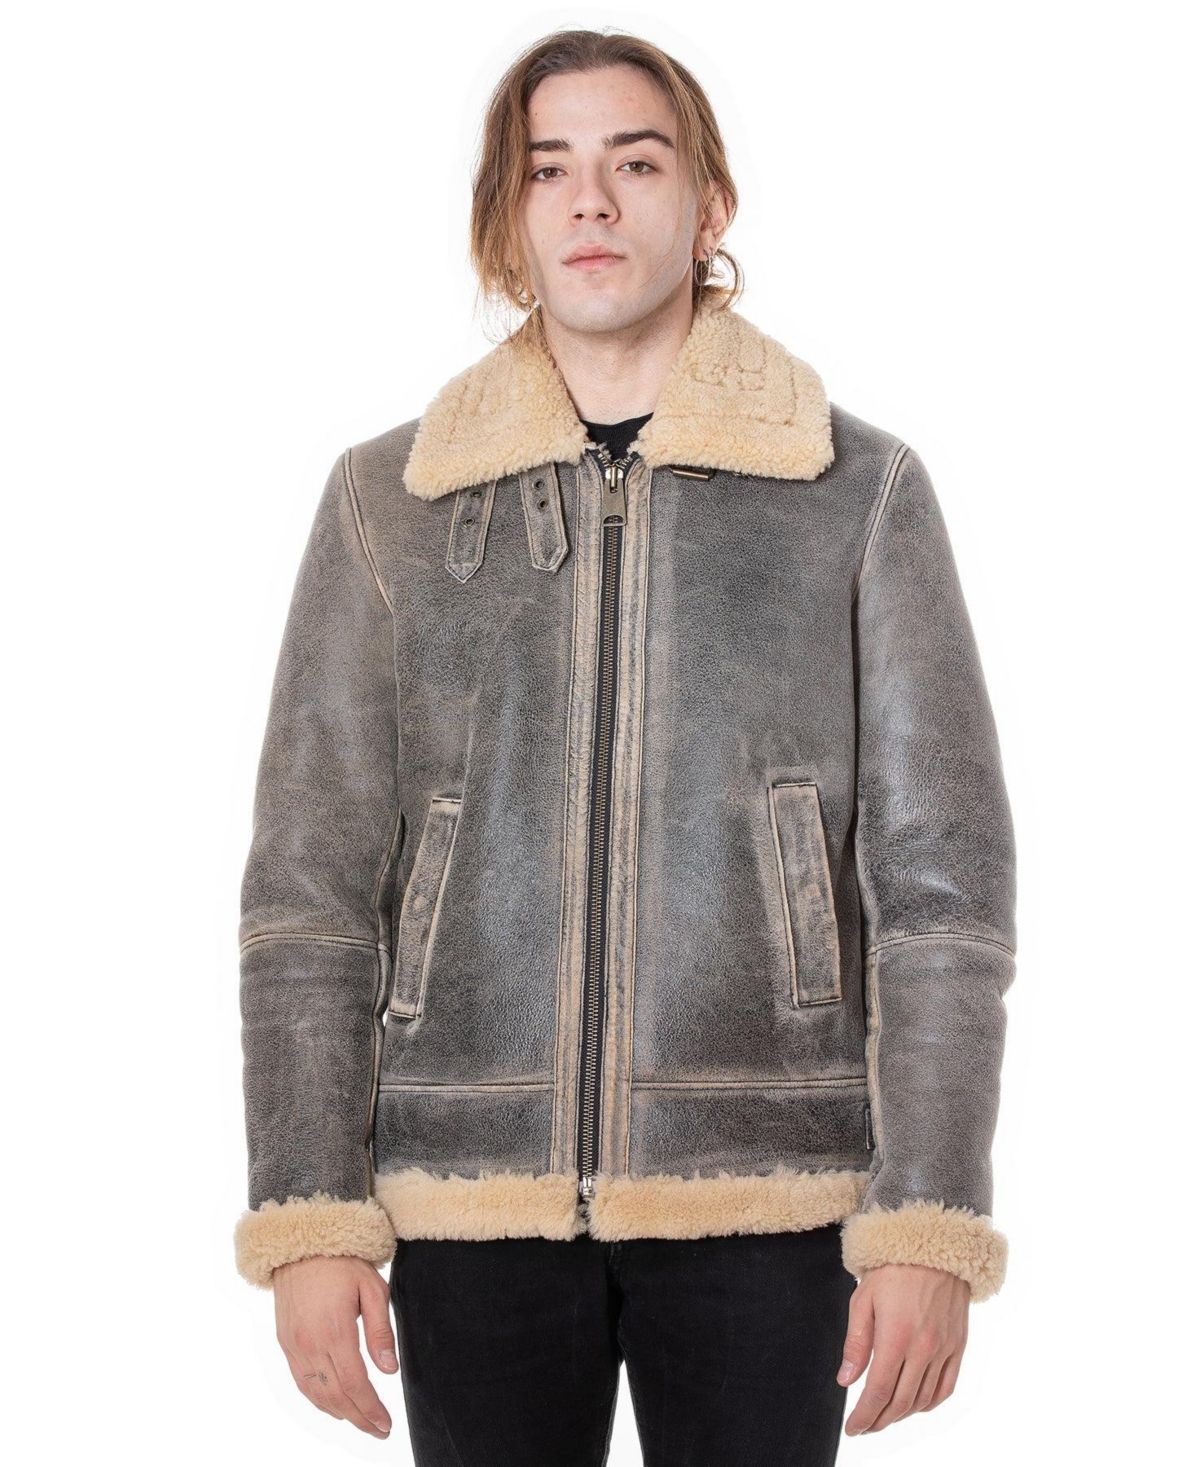 Men's Shearling Aviator Jacket, Distressed Grey with Beige Curly Wool - Grey